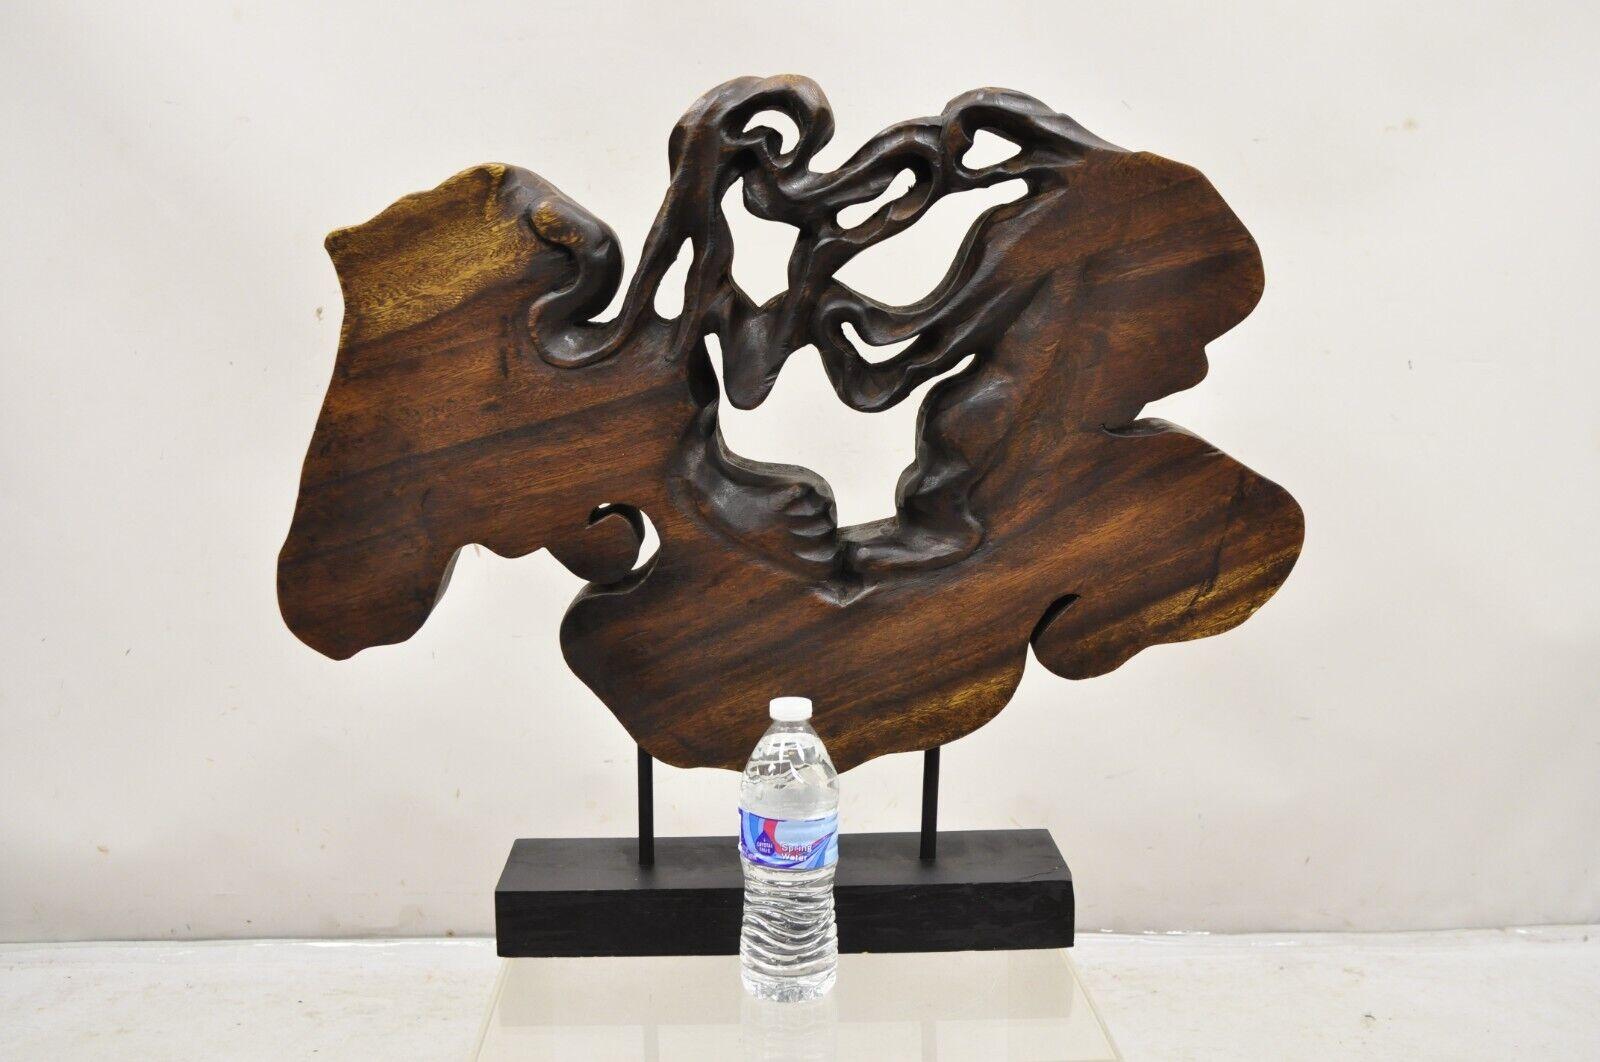 Organic Abstract Carved Teak Wood Large  Modernist Table Sculpture. Circa Late 20th to Early 21st Century. Measurements: 24